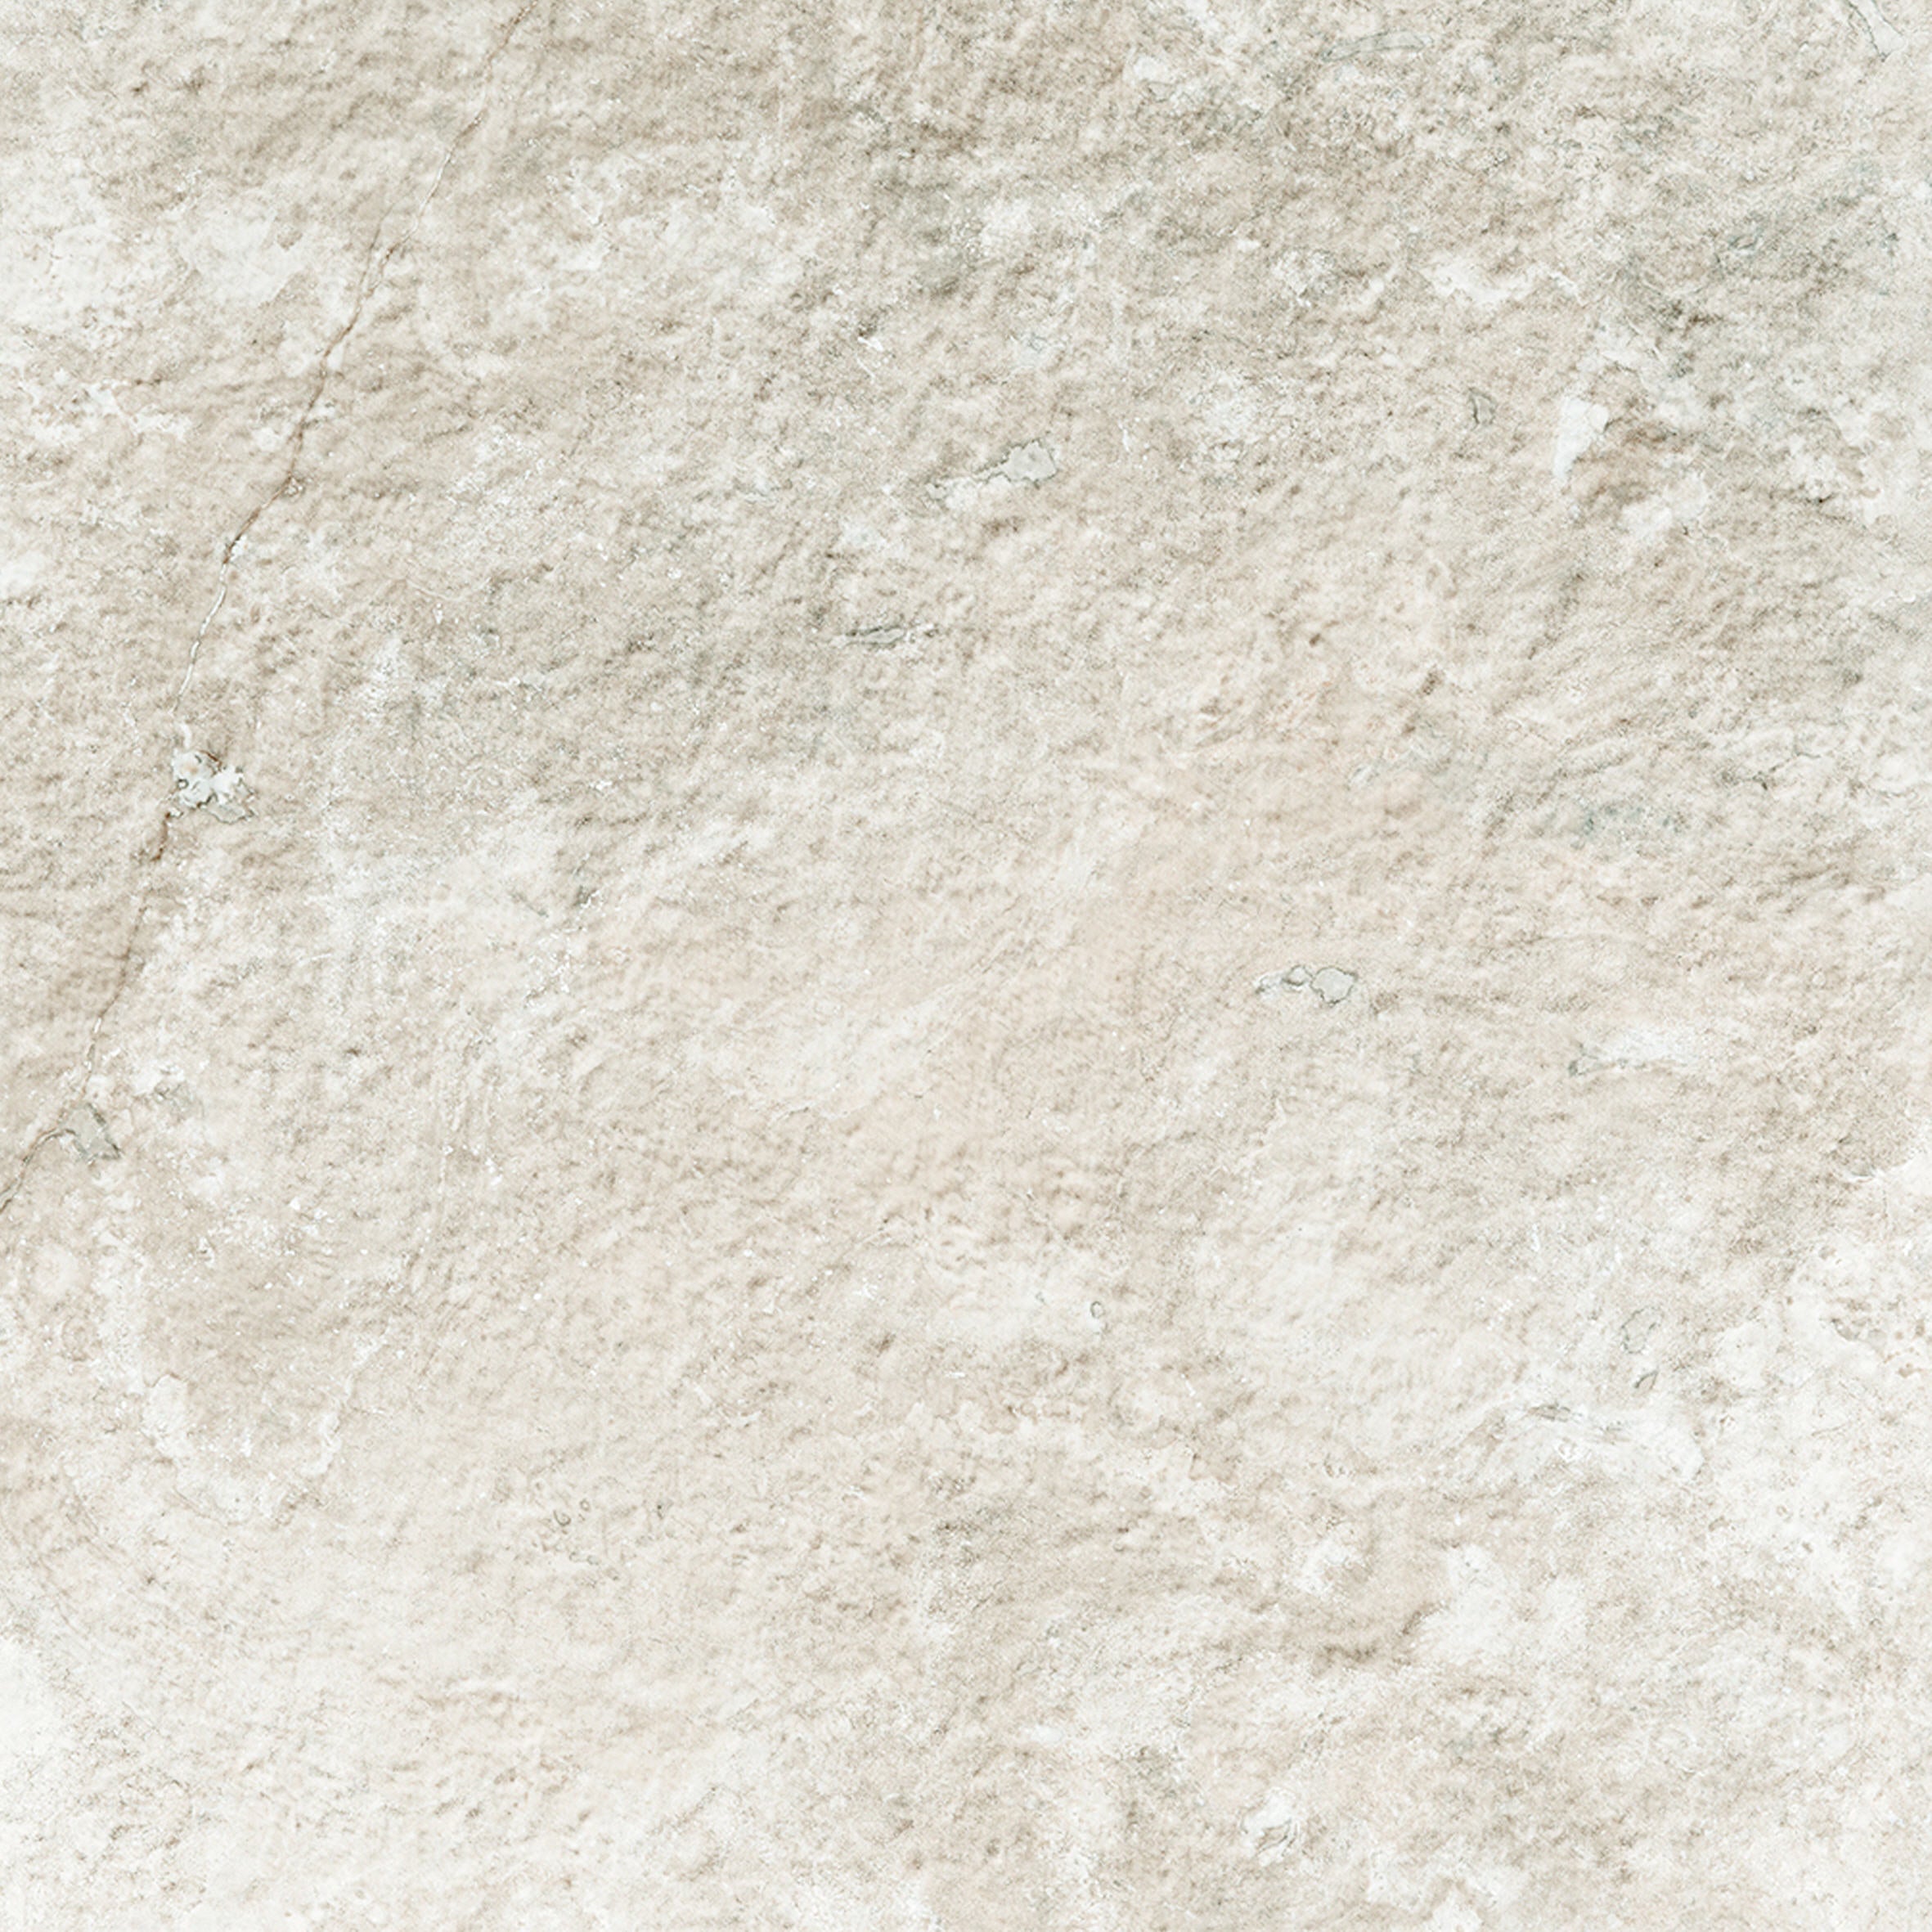 landmark frontier20 travertine cross cut white paver tile 24x24x20mm matte rectified porcelain tile distributed by surface group international